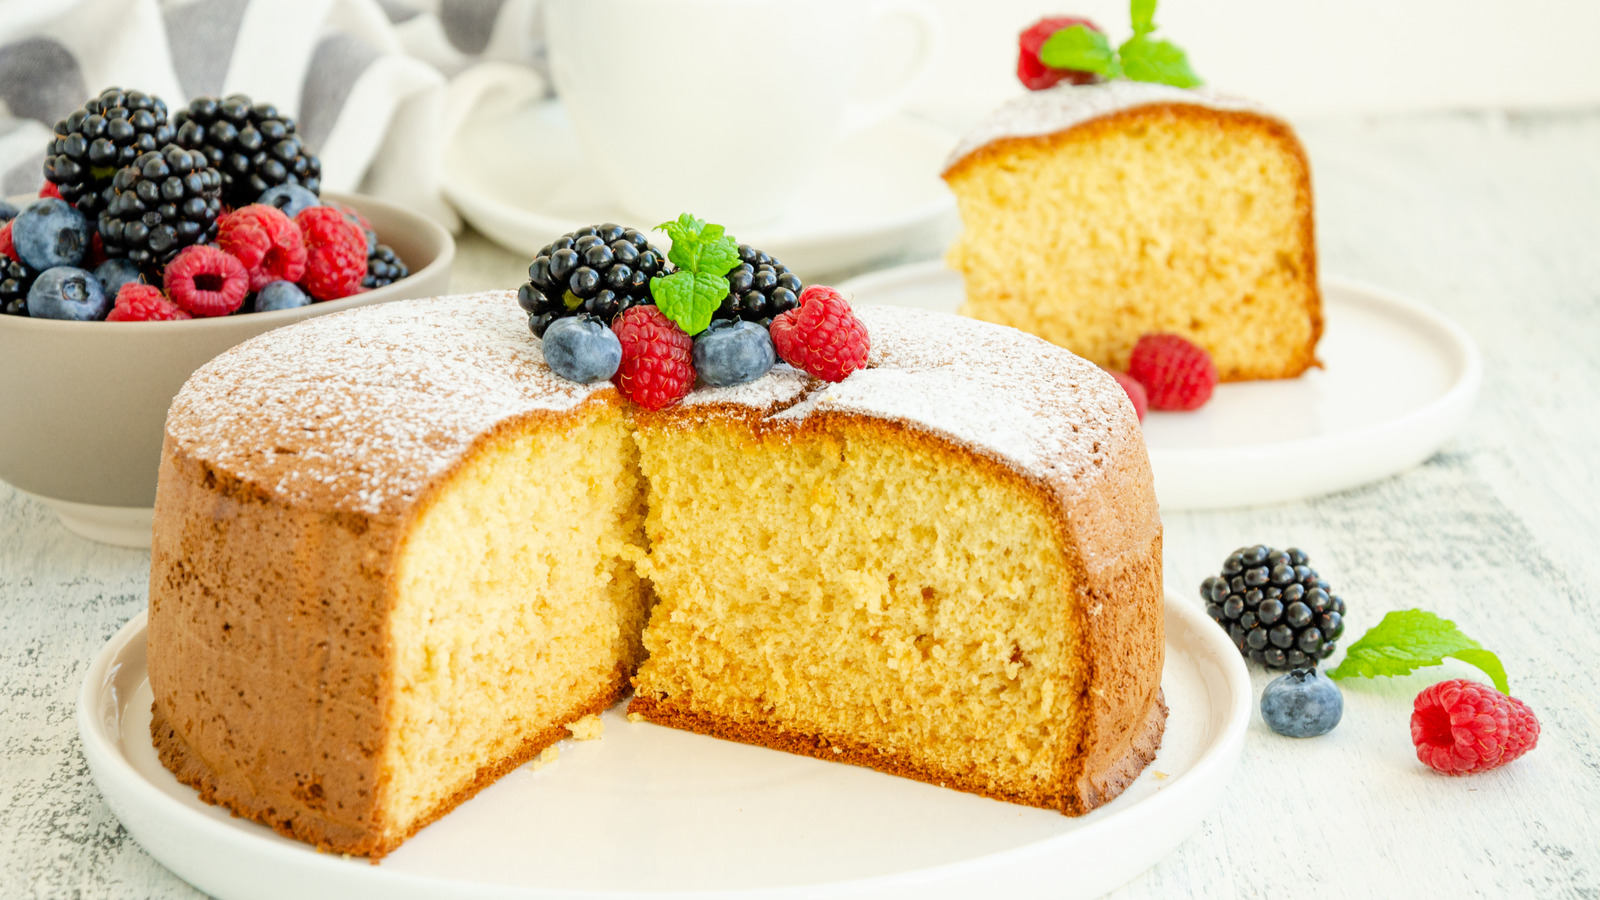 What's The Difference Between Sponge Cake And Chiffon Cake?